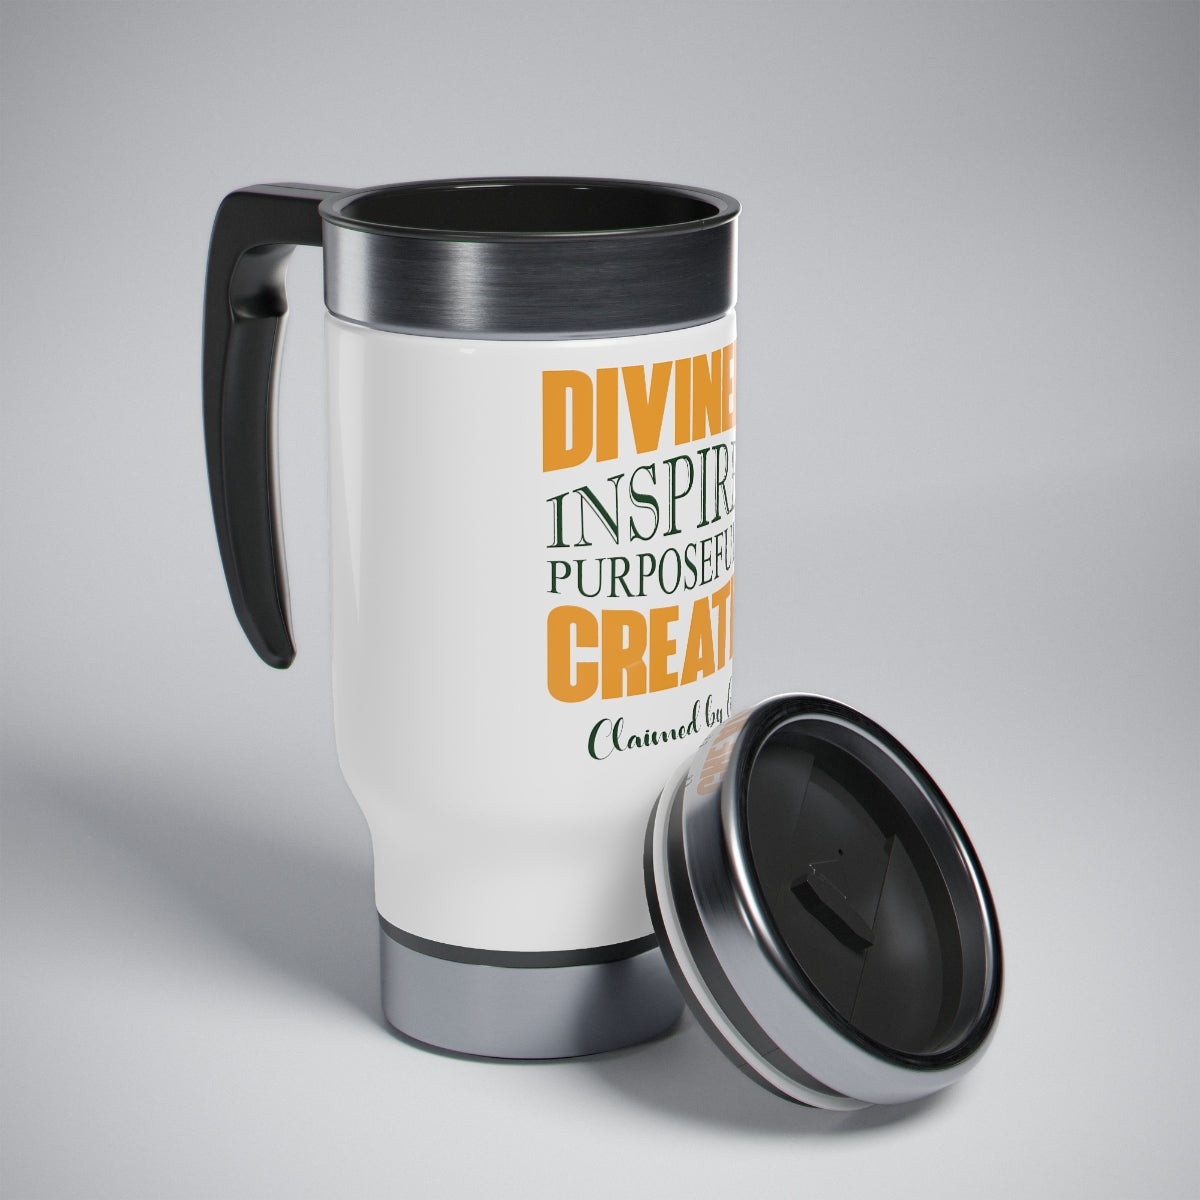 Divinely Inspired Purposefully Created Stainless Steel Travel Mug with Handle, 14oz Printify